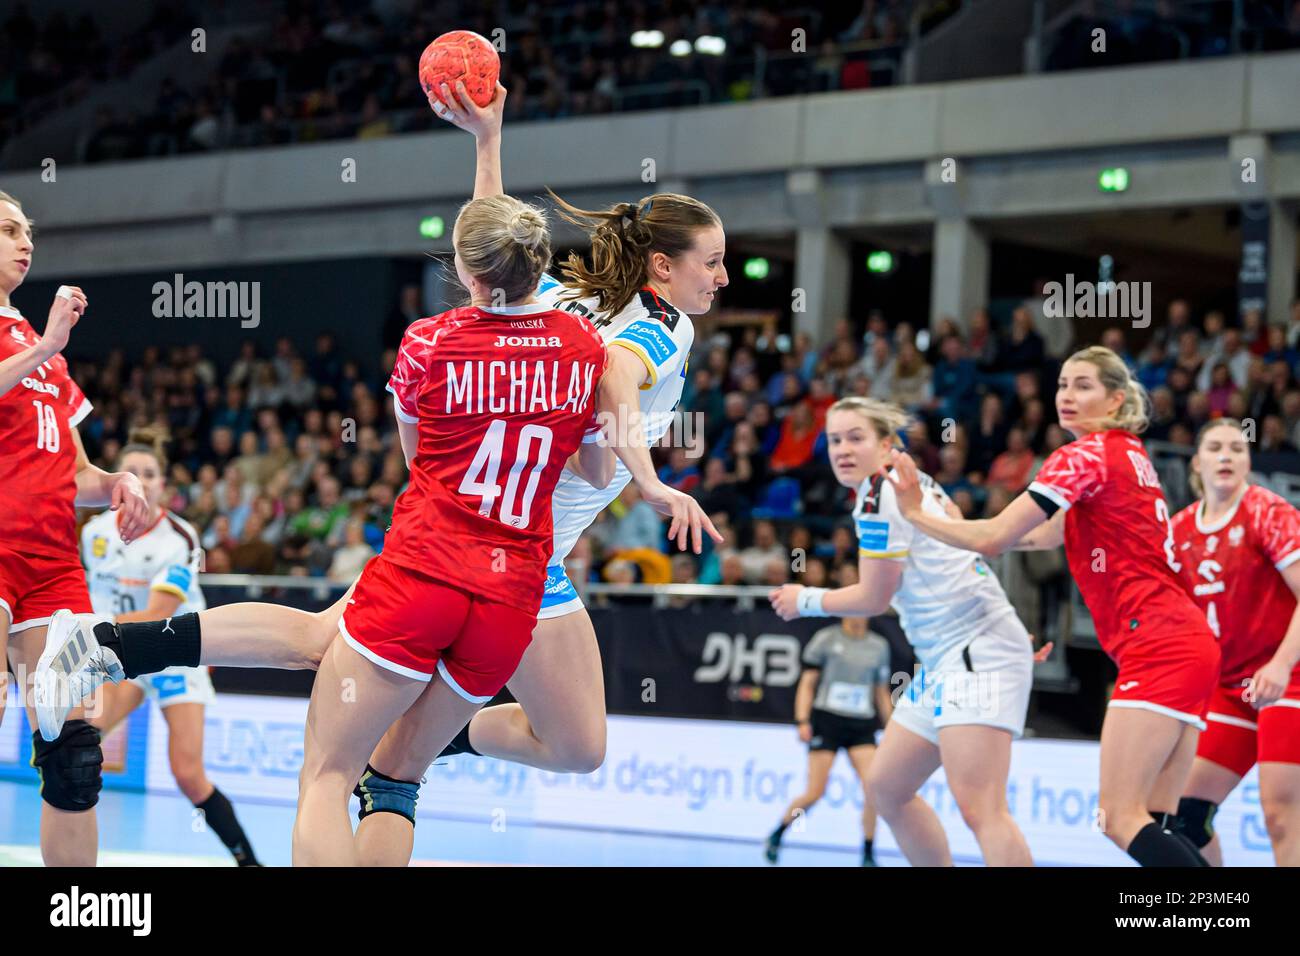 Heidelberg, Germany. 05th Mar, 2023. Handball, women: International match, Germany - Poland. Daria Michalak (M left) from Poland and Julia Maidhof (M right) from Germany fight for the ball. Credit: Marco Wolf/dpa/Alamy Live News Stock Photo